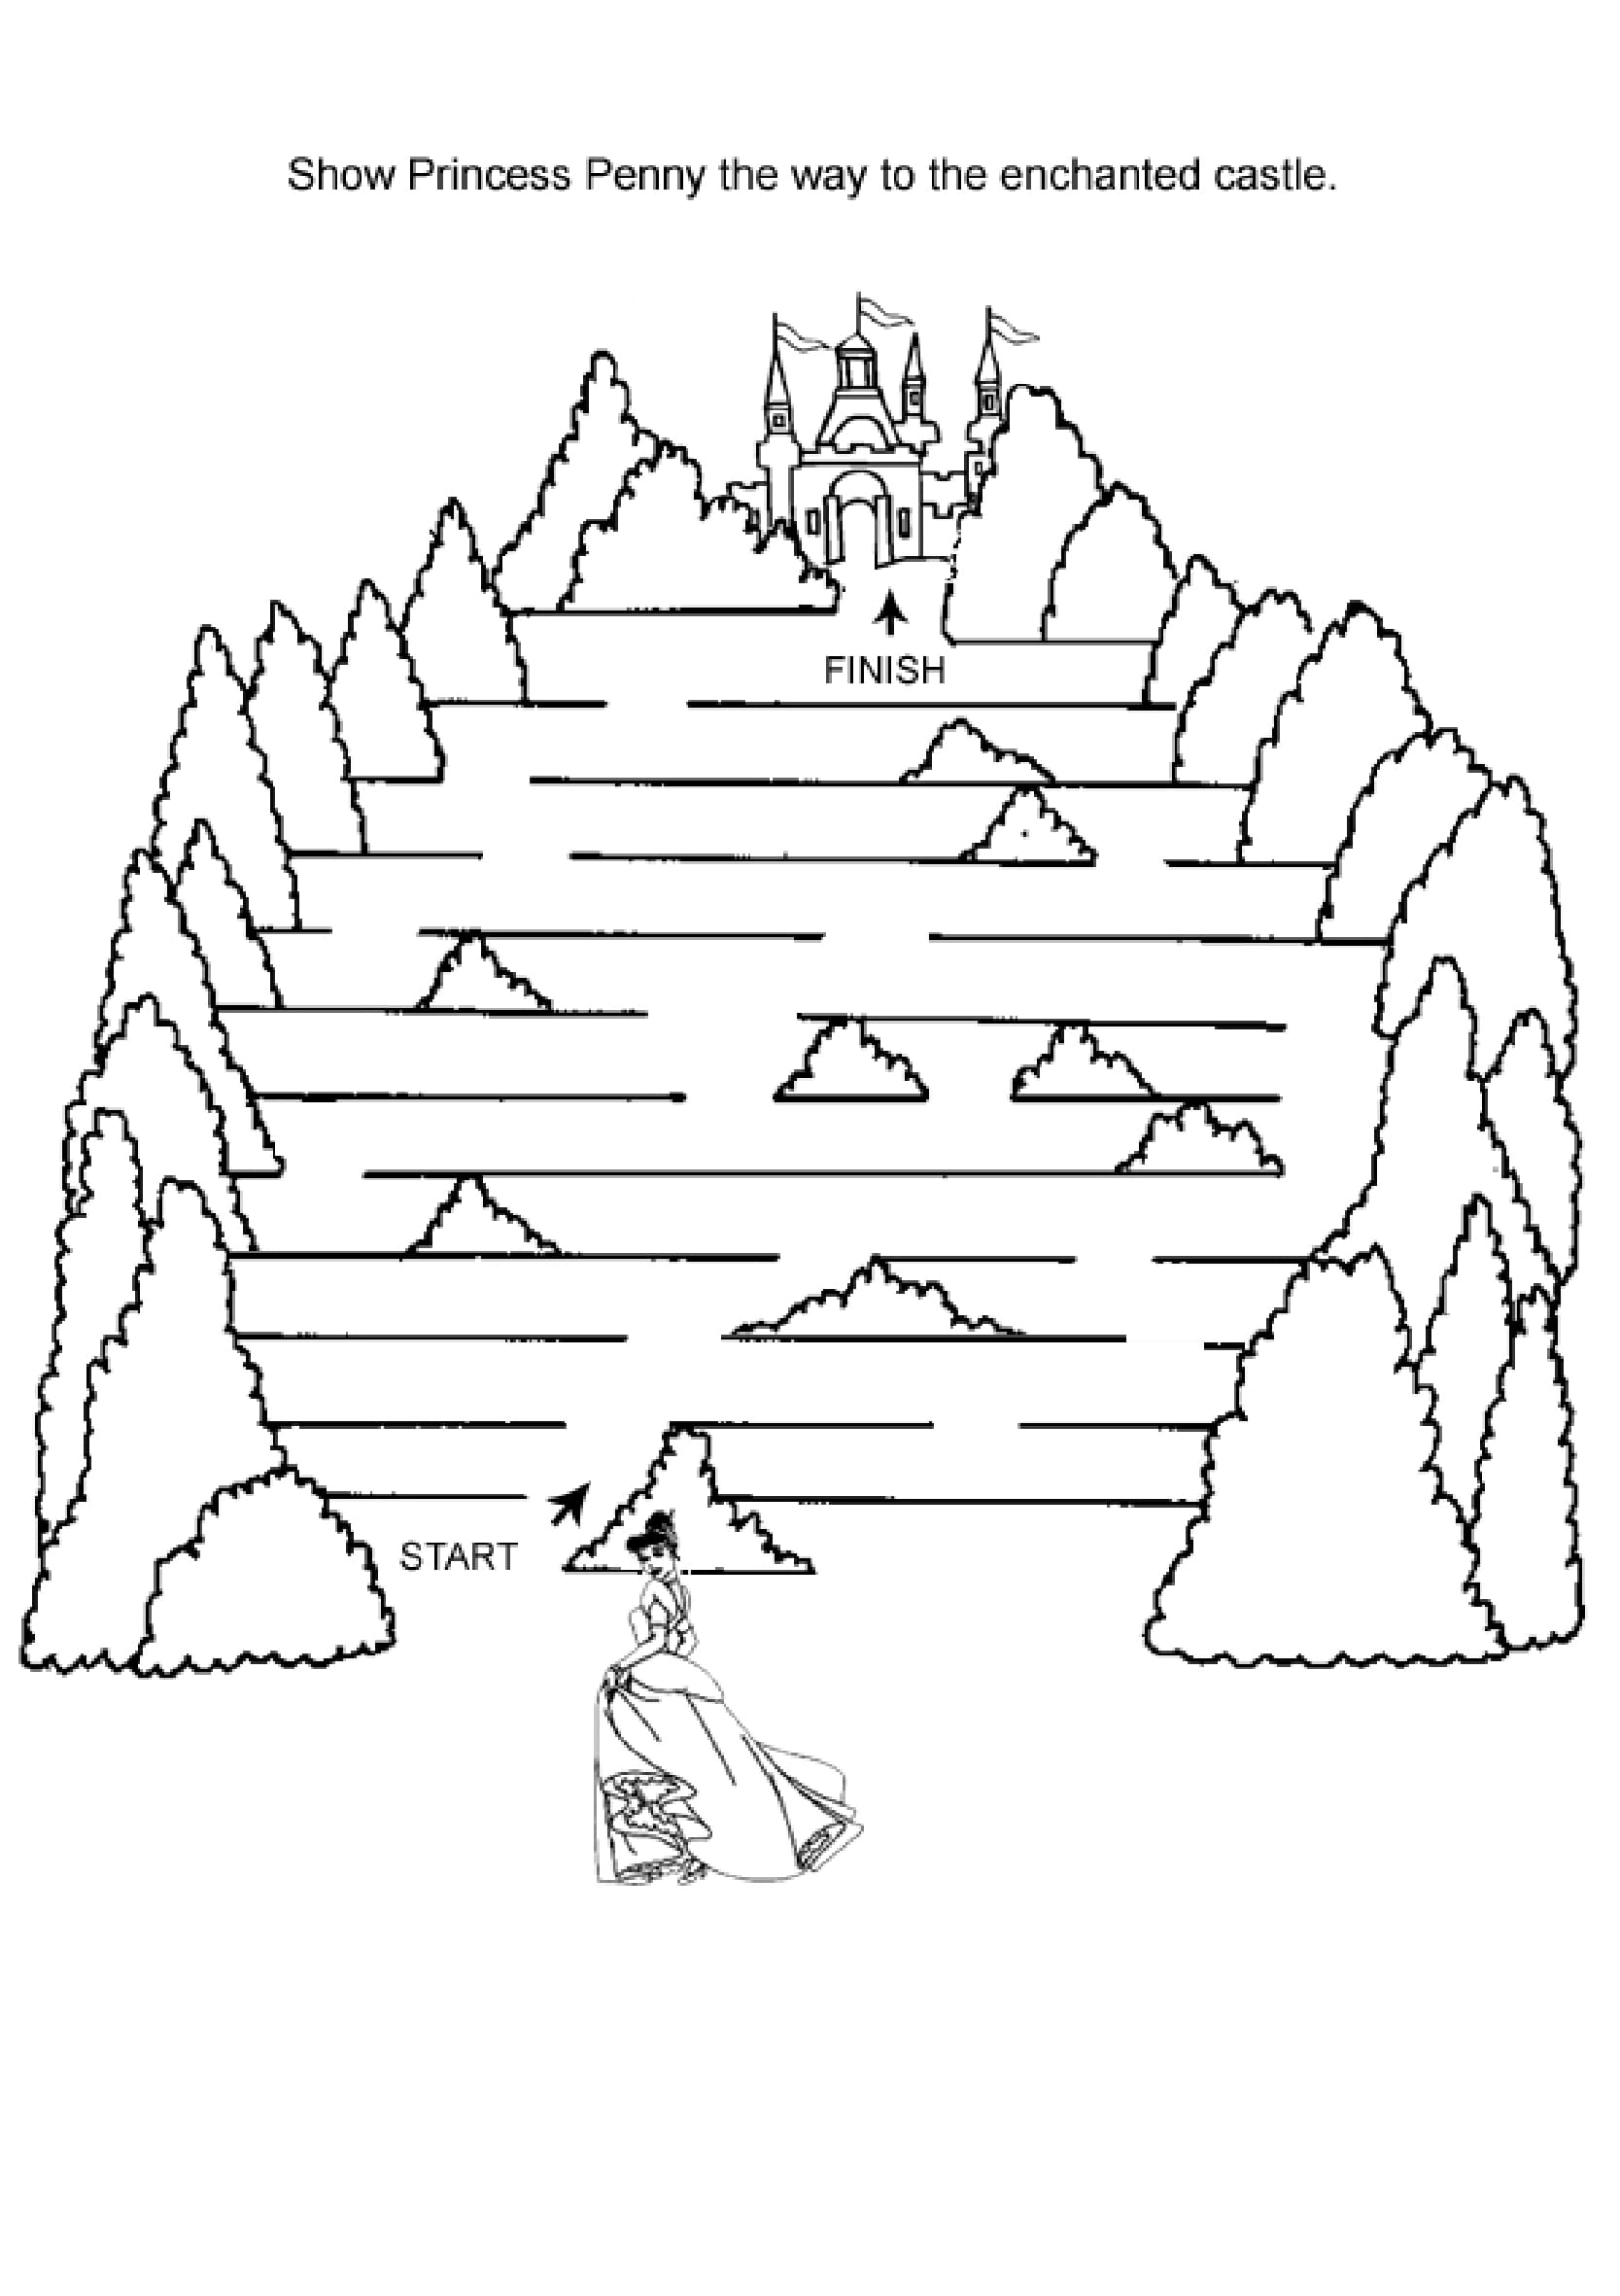 Download Easy Mazes. Printable Mazes for Kids. - Best Coloring Pages For Kids